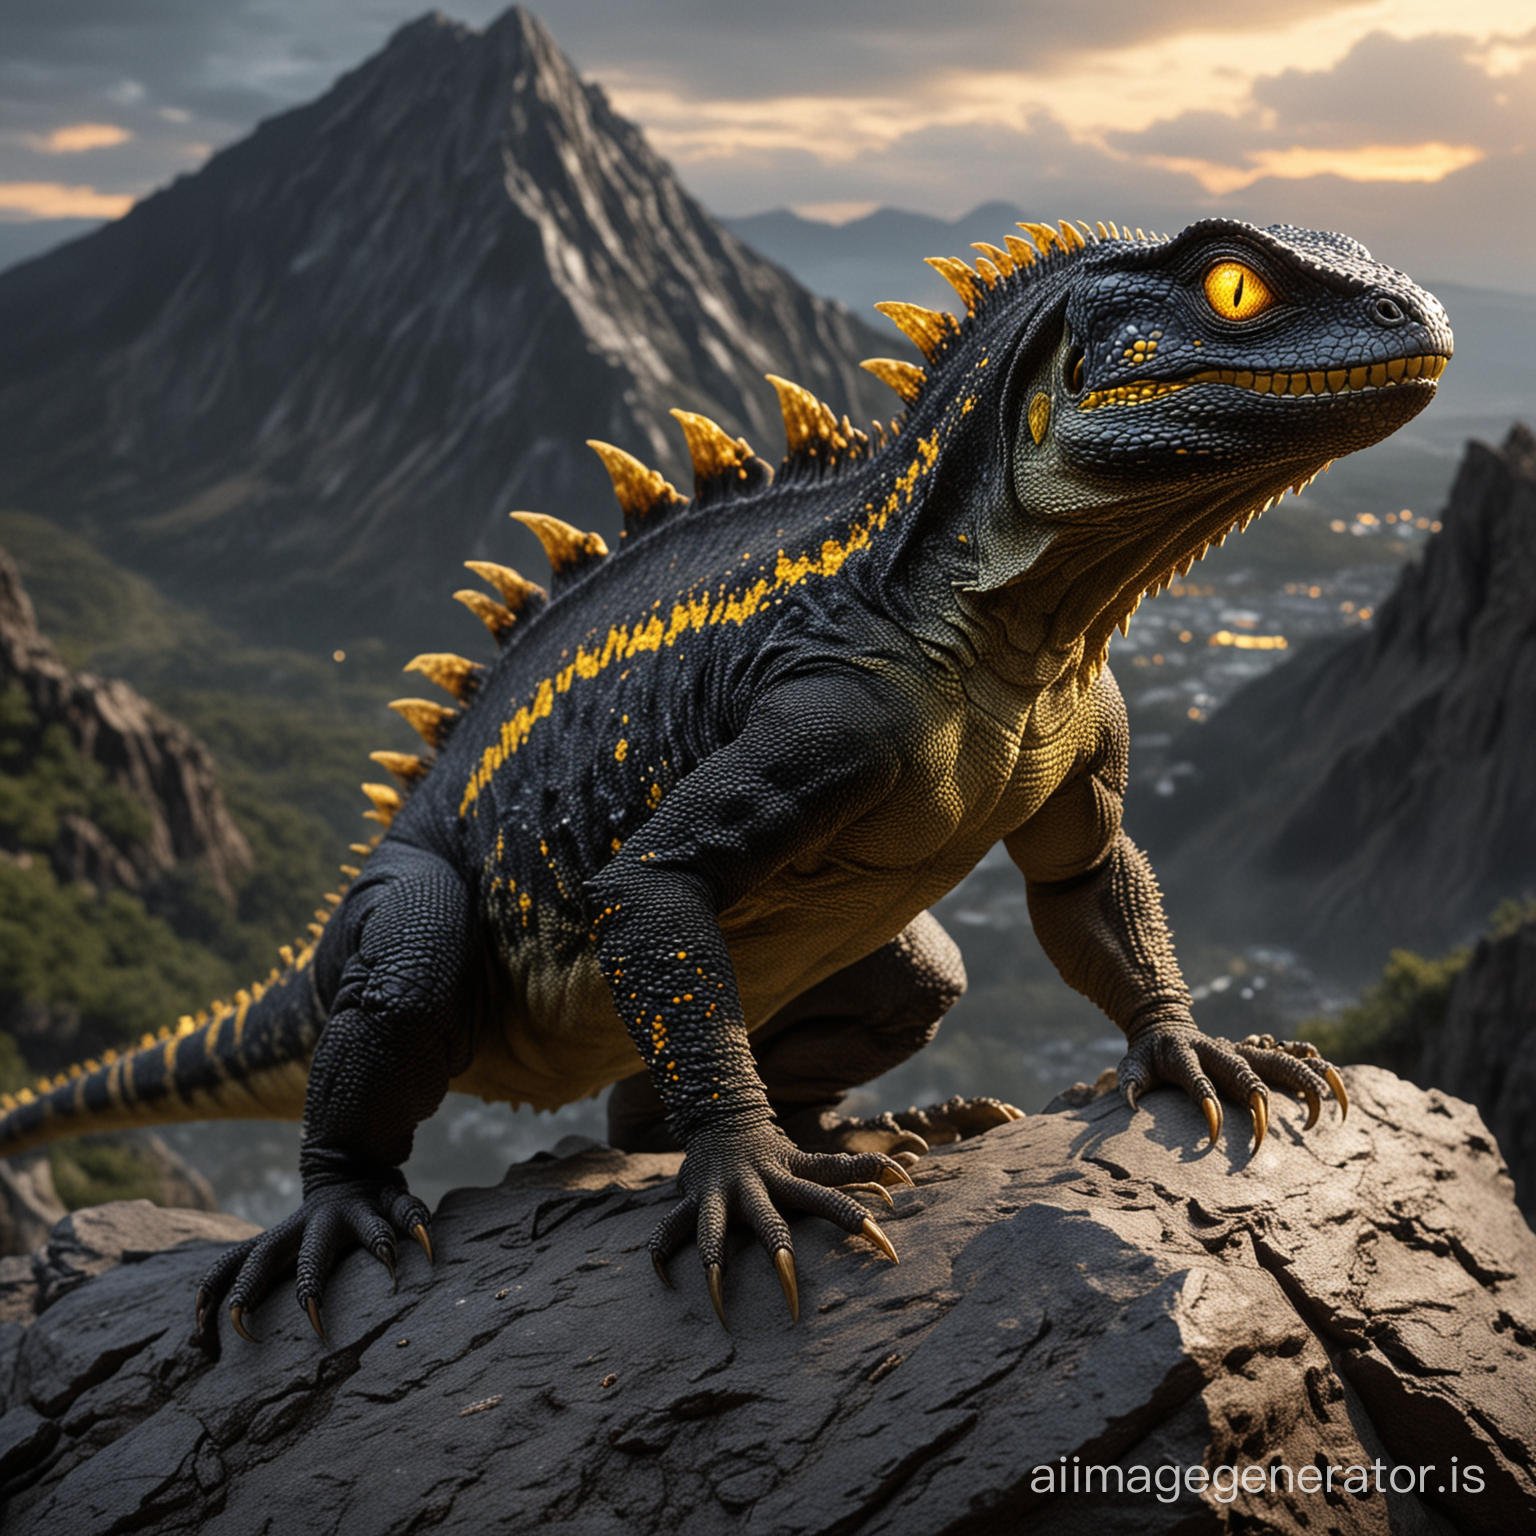 A lizard that has a black scale with glowing gold linings, yellow eyes, add a bit of Godzilla and is the size of a house standing in the middle of two mountains.